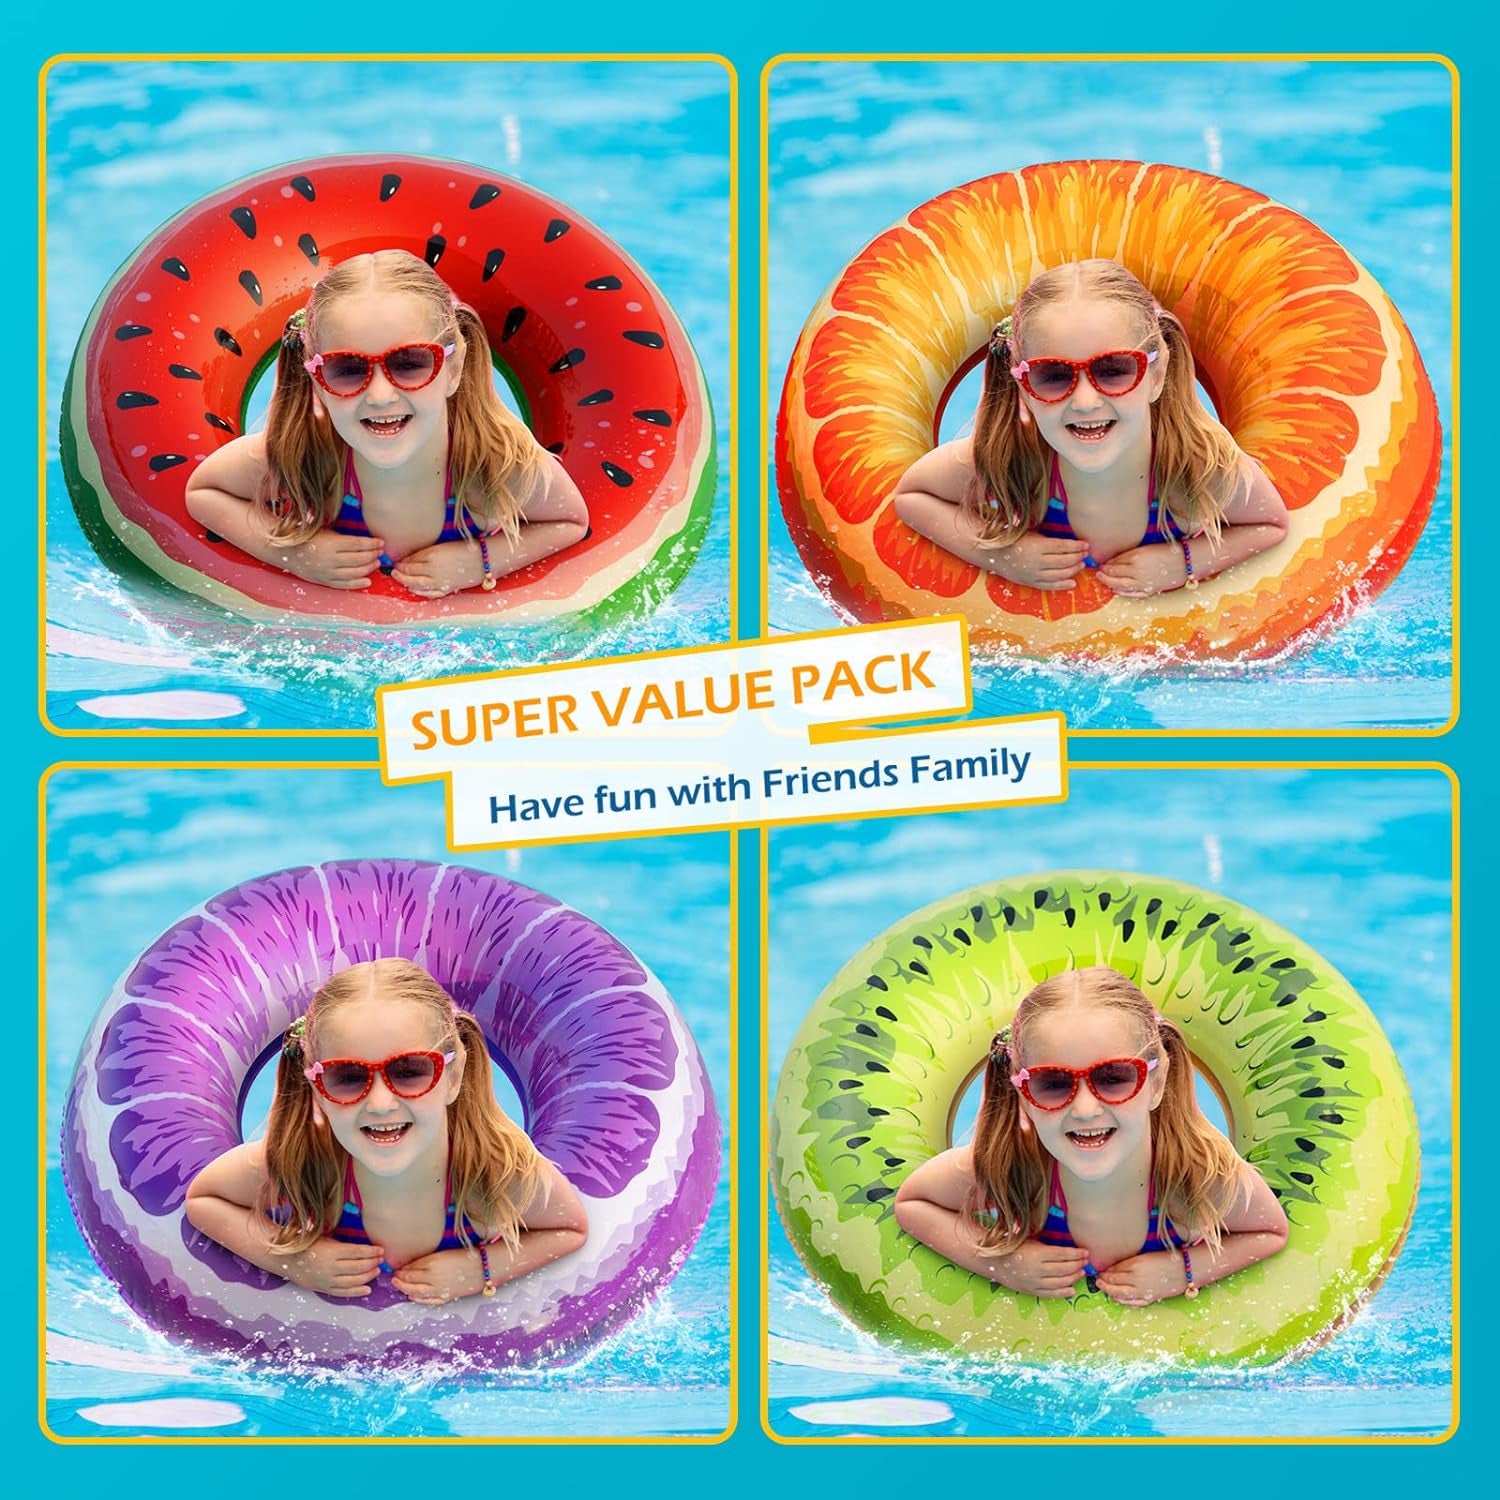 Inflatable Pool Floats Kids - 2 Pack Floaties Pool Tubes Swim Rings Fruit Water Floaty Watermelon Kiwi Inflatable Pool Toys Float for Swimming Pool Party Lake Beach Adults